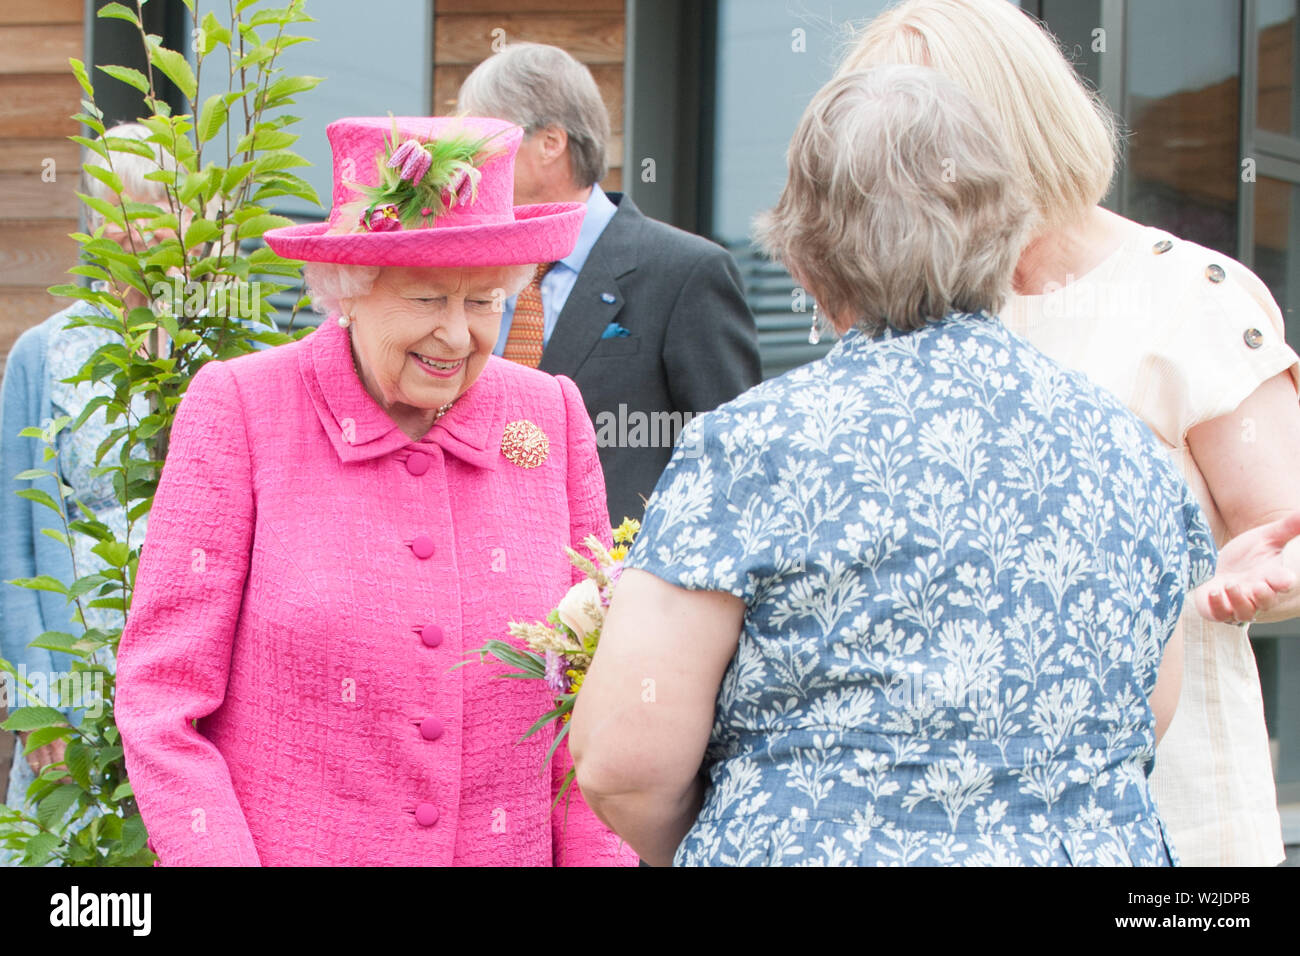 Cambridge, UK. 9th July 2019. Queen Elizabeth II visits Cambridge where Her Majesty started the day at the NIAB, (National Institute of Agricultural Botany), Park Farm. July 9th 2019. Credit: Matrix/MediaPunch ***FOR USA ONLY*** REF: TST 192477 Credit: MediaPunch Inc/Alamy Live News Stock Photo